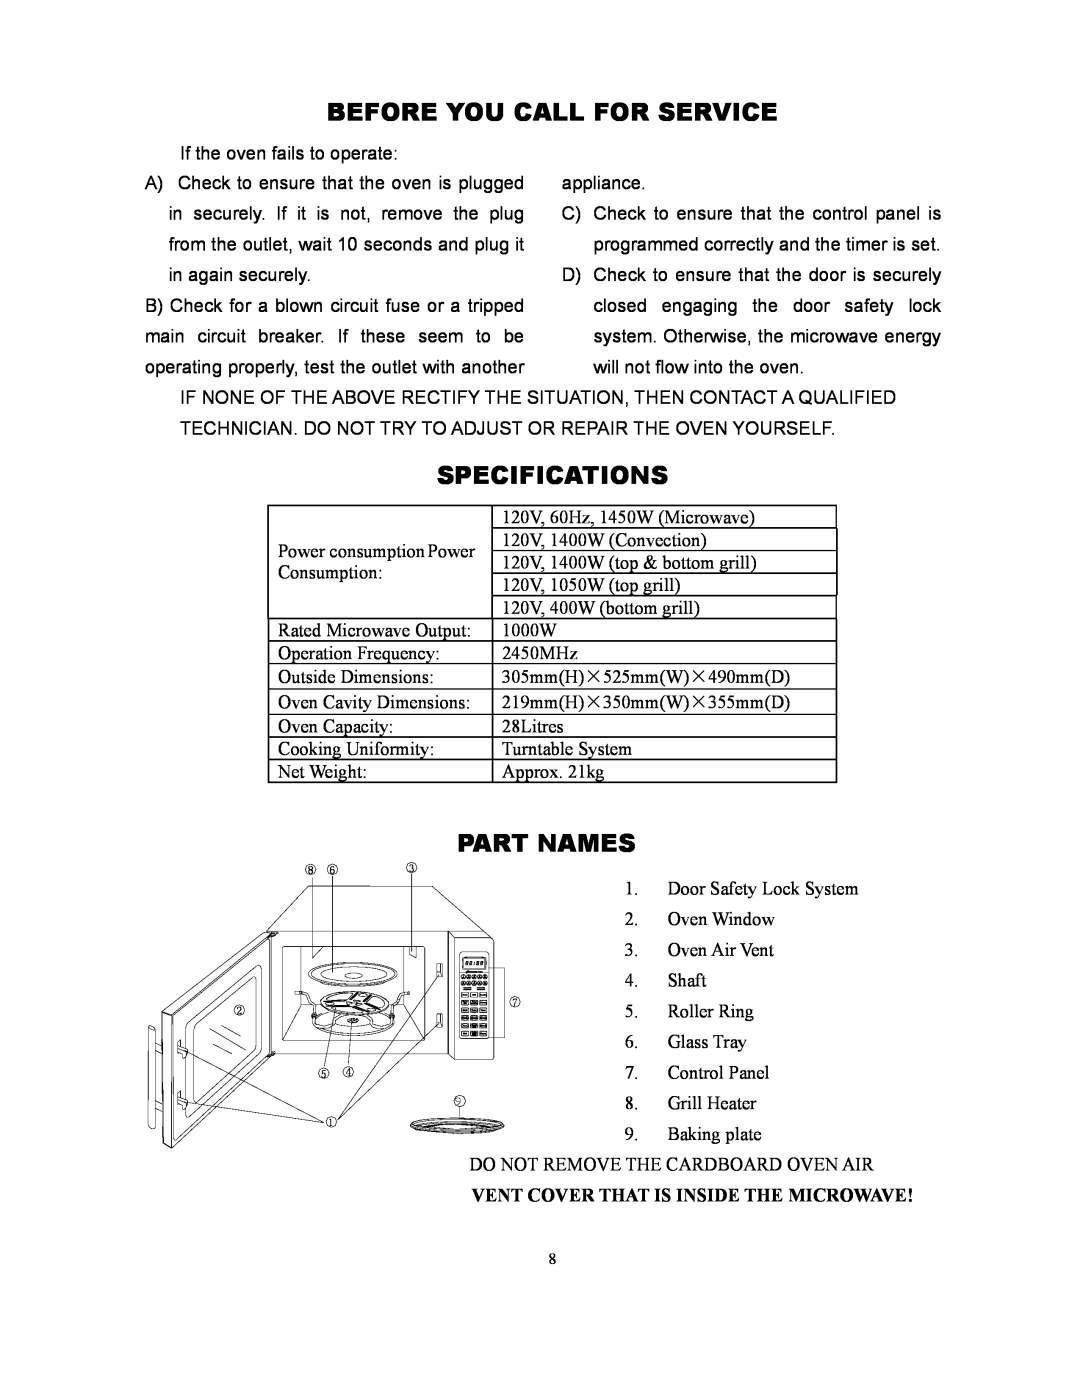 RCA RMW1171 owner manual Before You Call For Service, Specifications, Part Names, Vent Cover That Is Inside The Microwave 